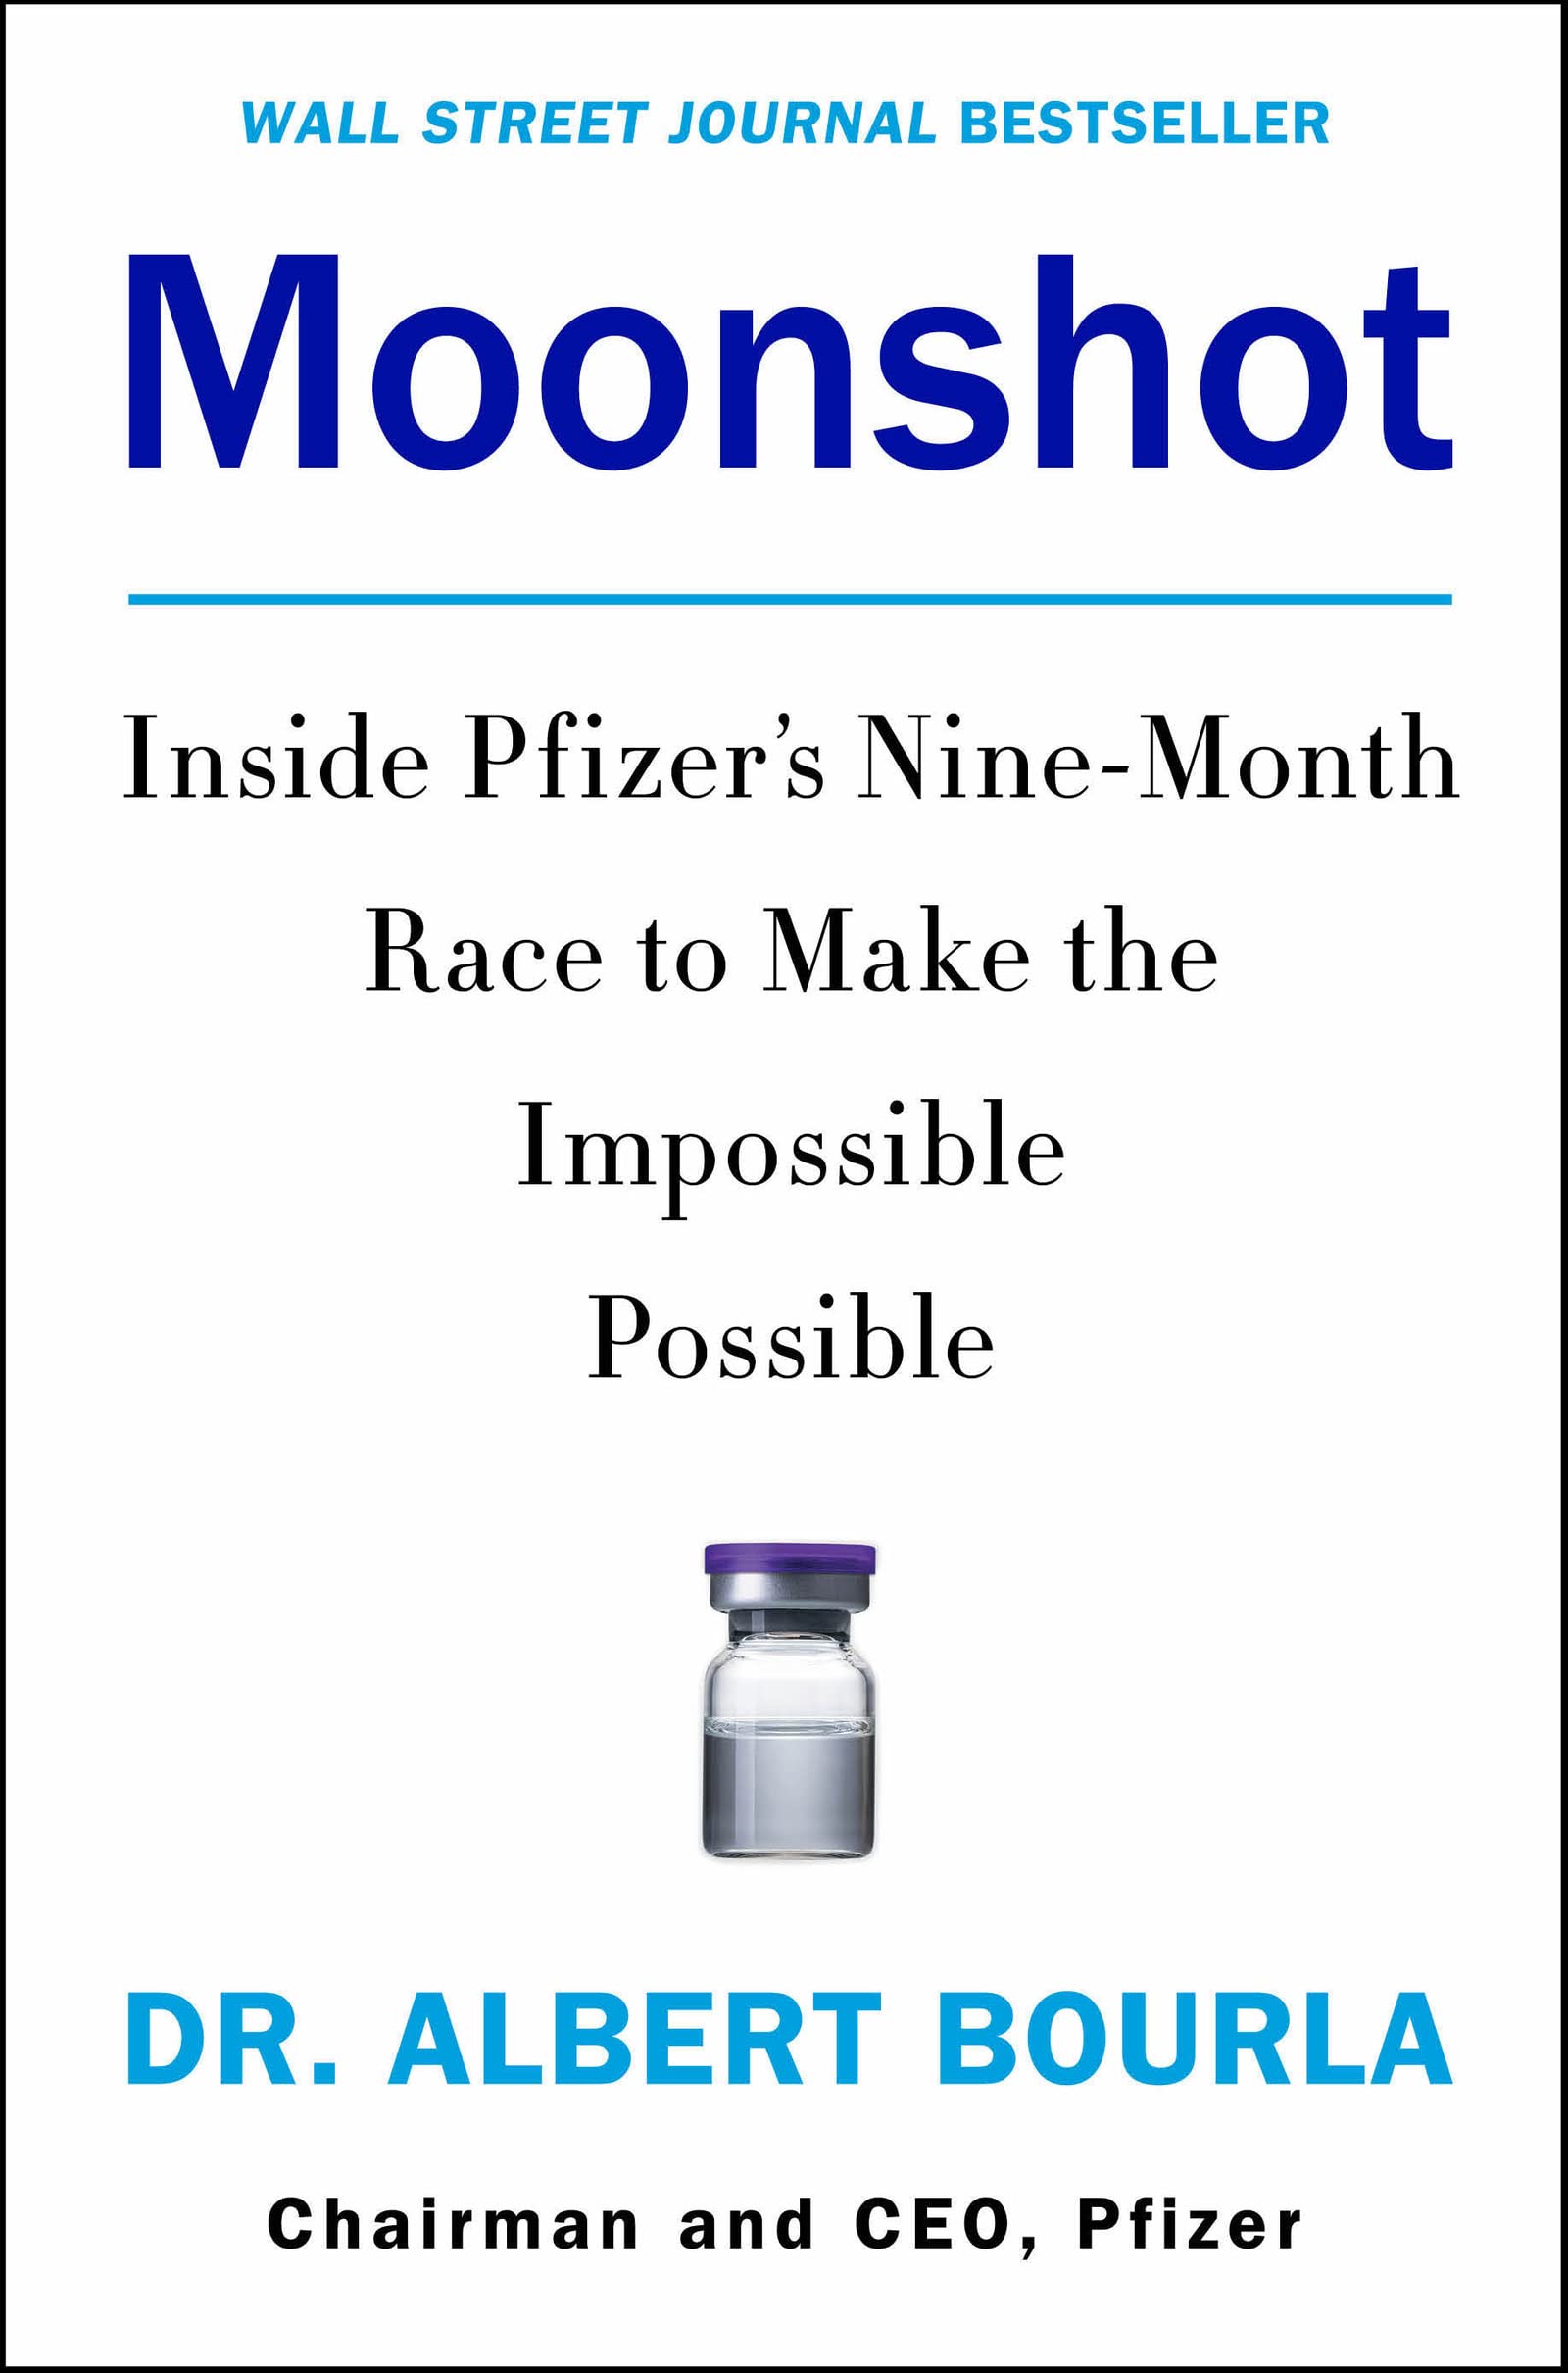 Moonshot: Inside Pfizers Nine-Month Race to Make the Impossible Possible (Hardcover)